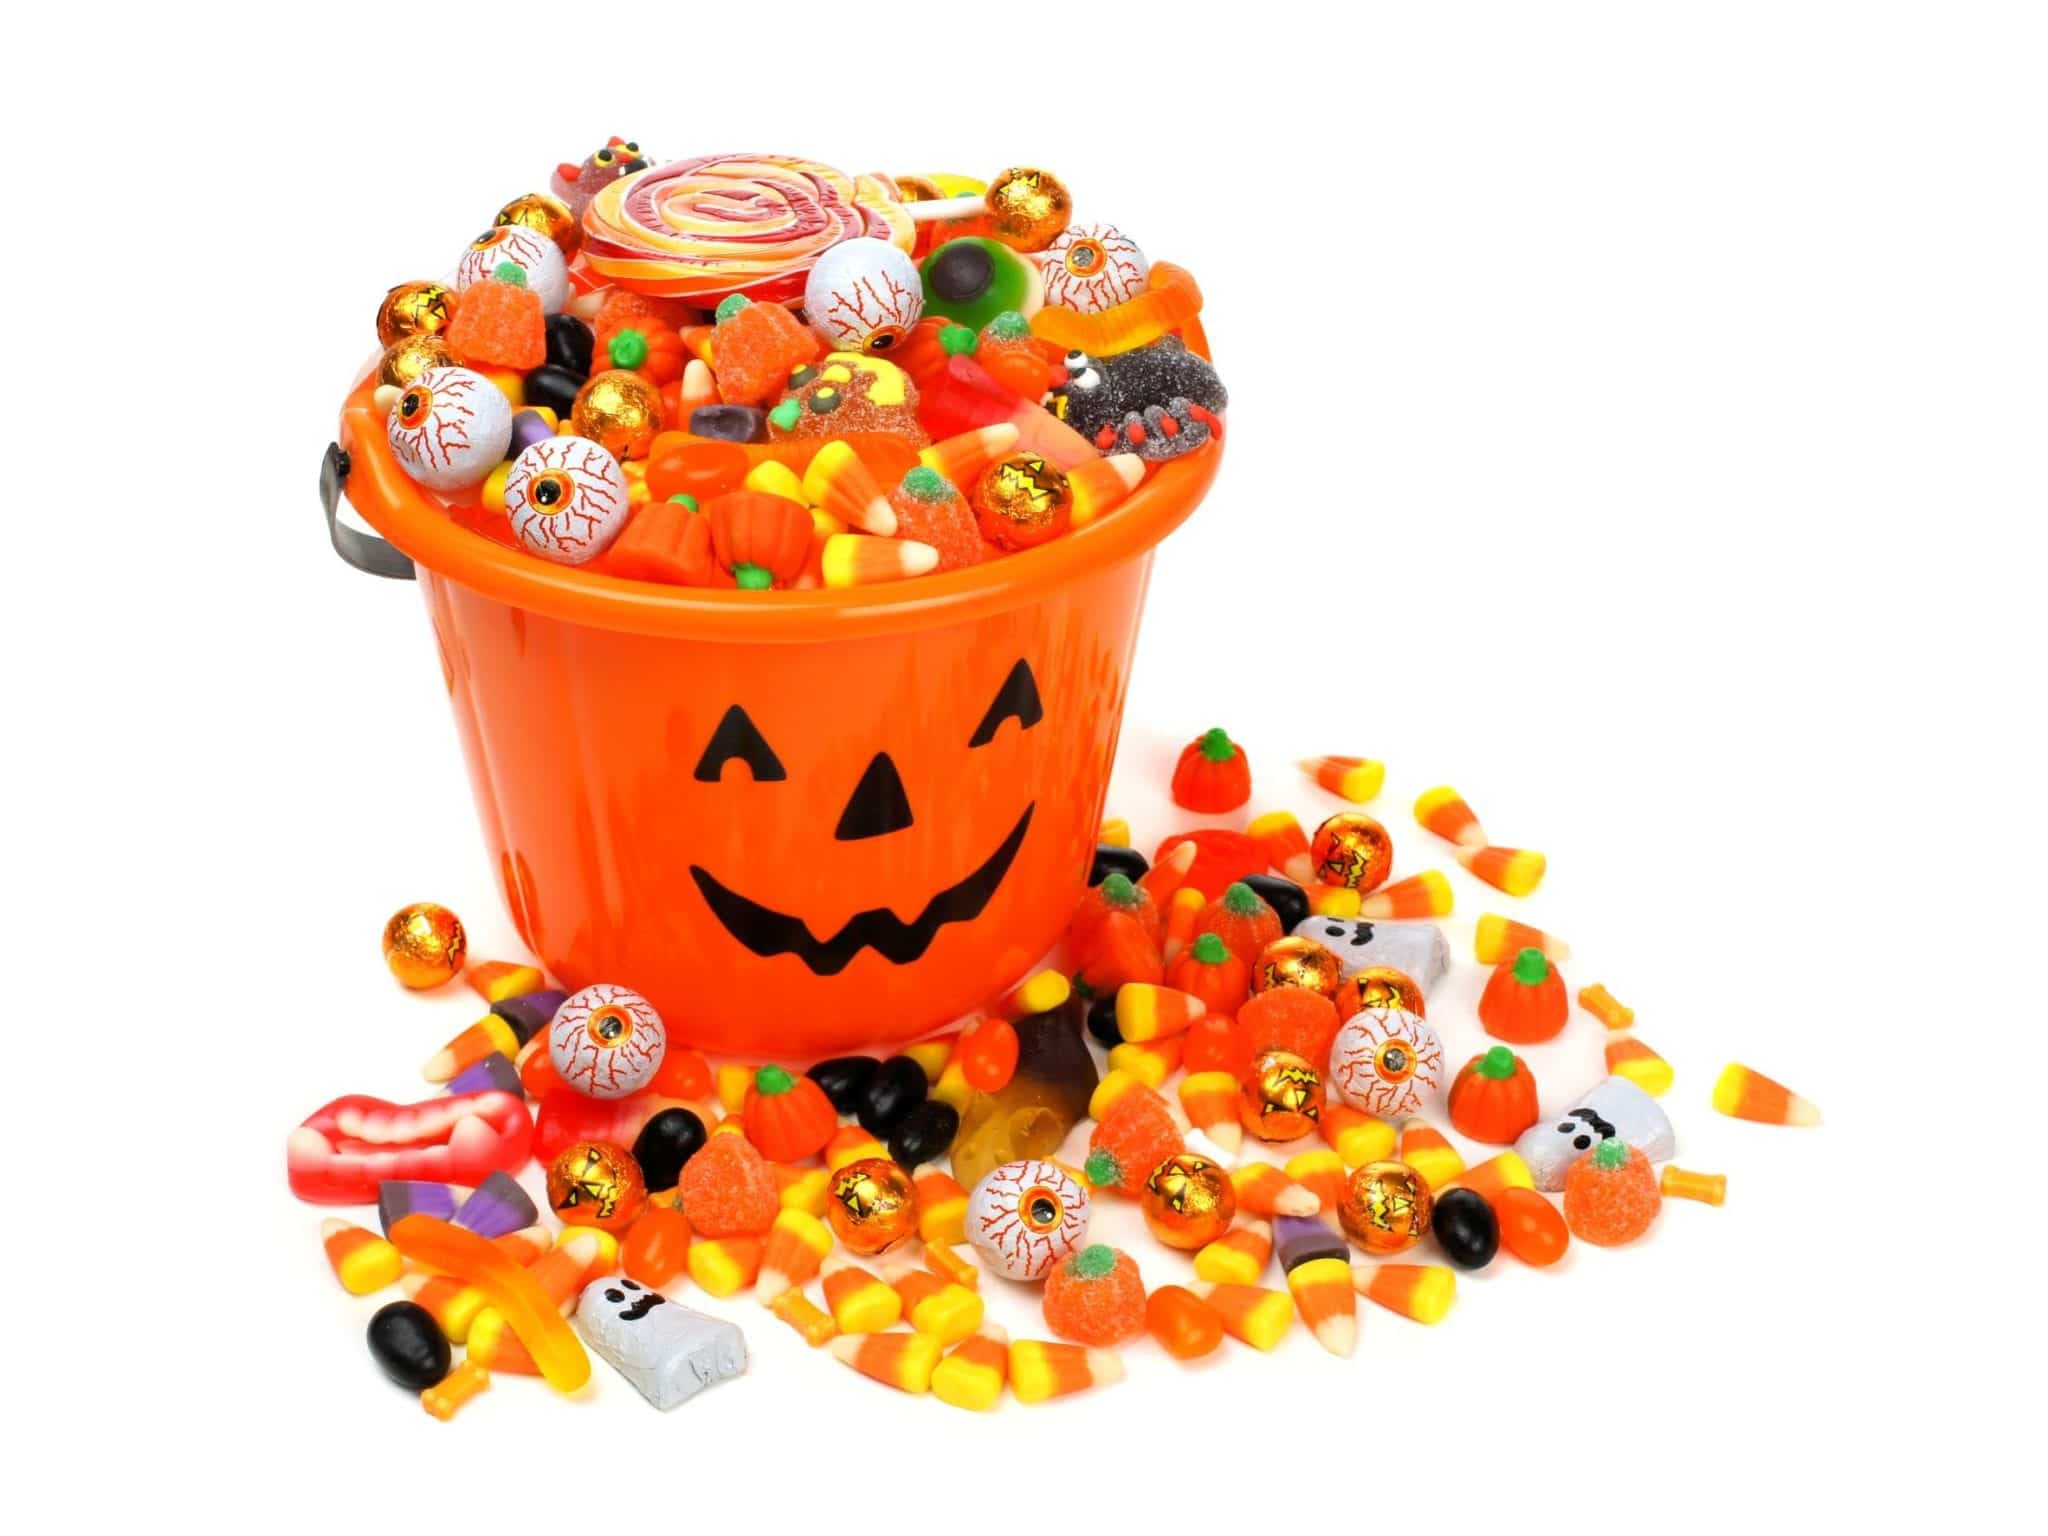 Trick-or-Treating Safely This Season